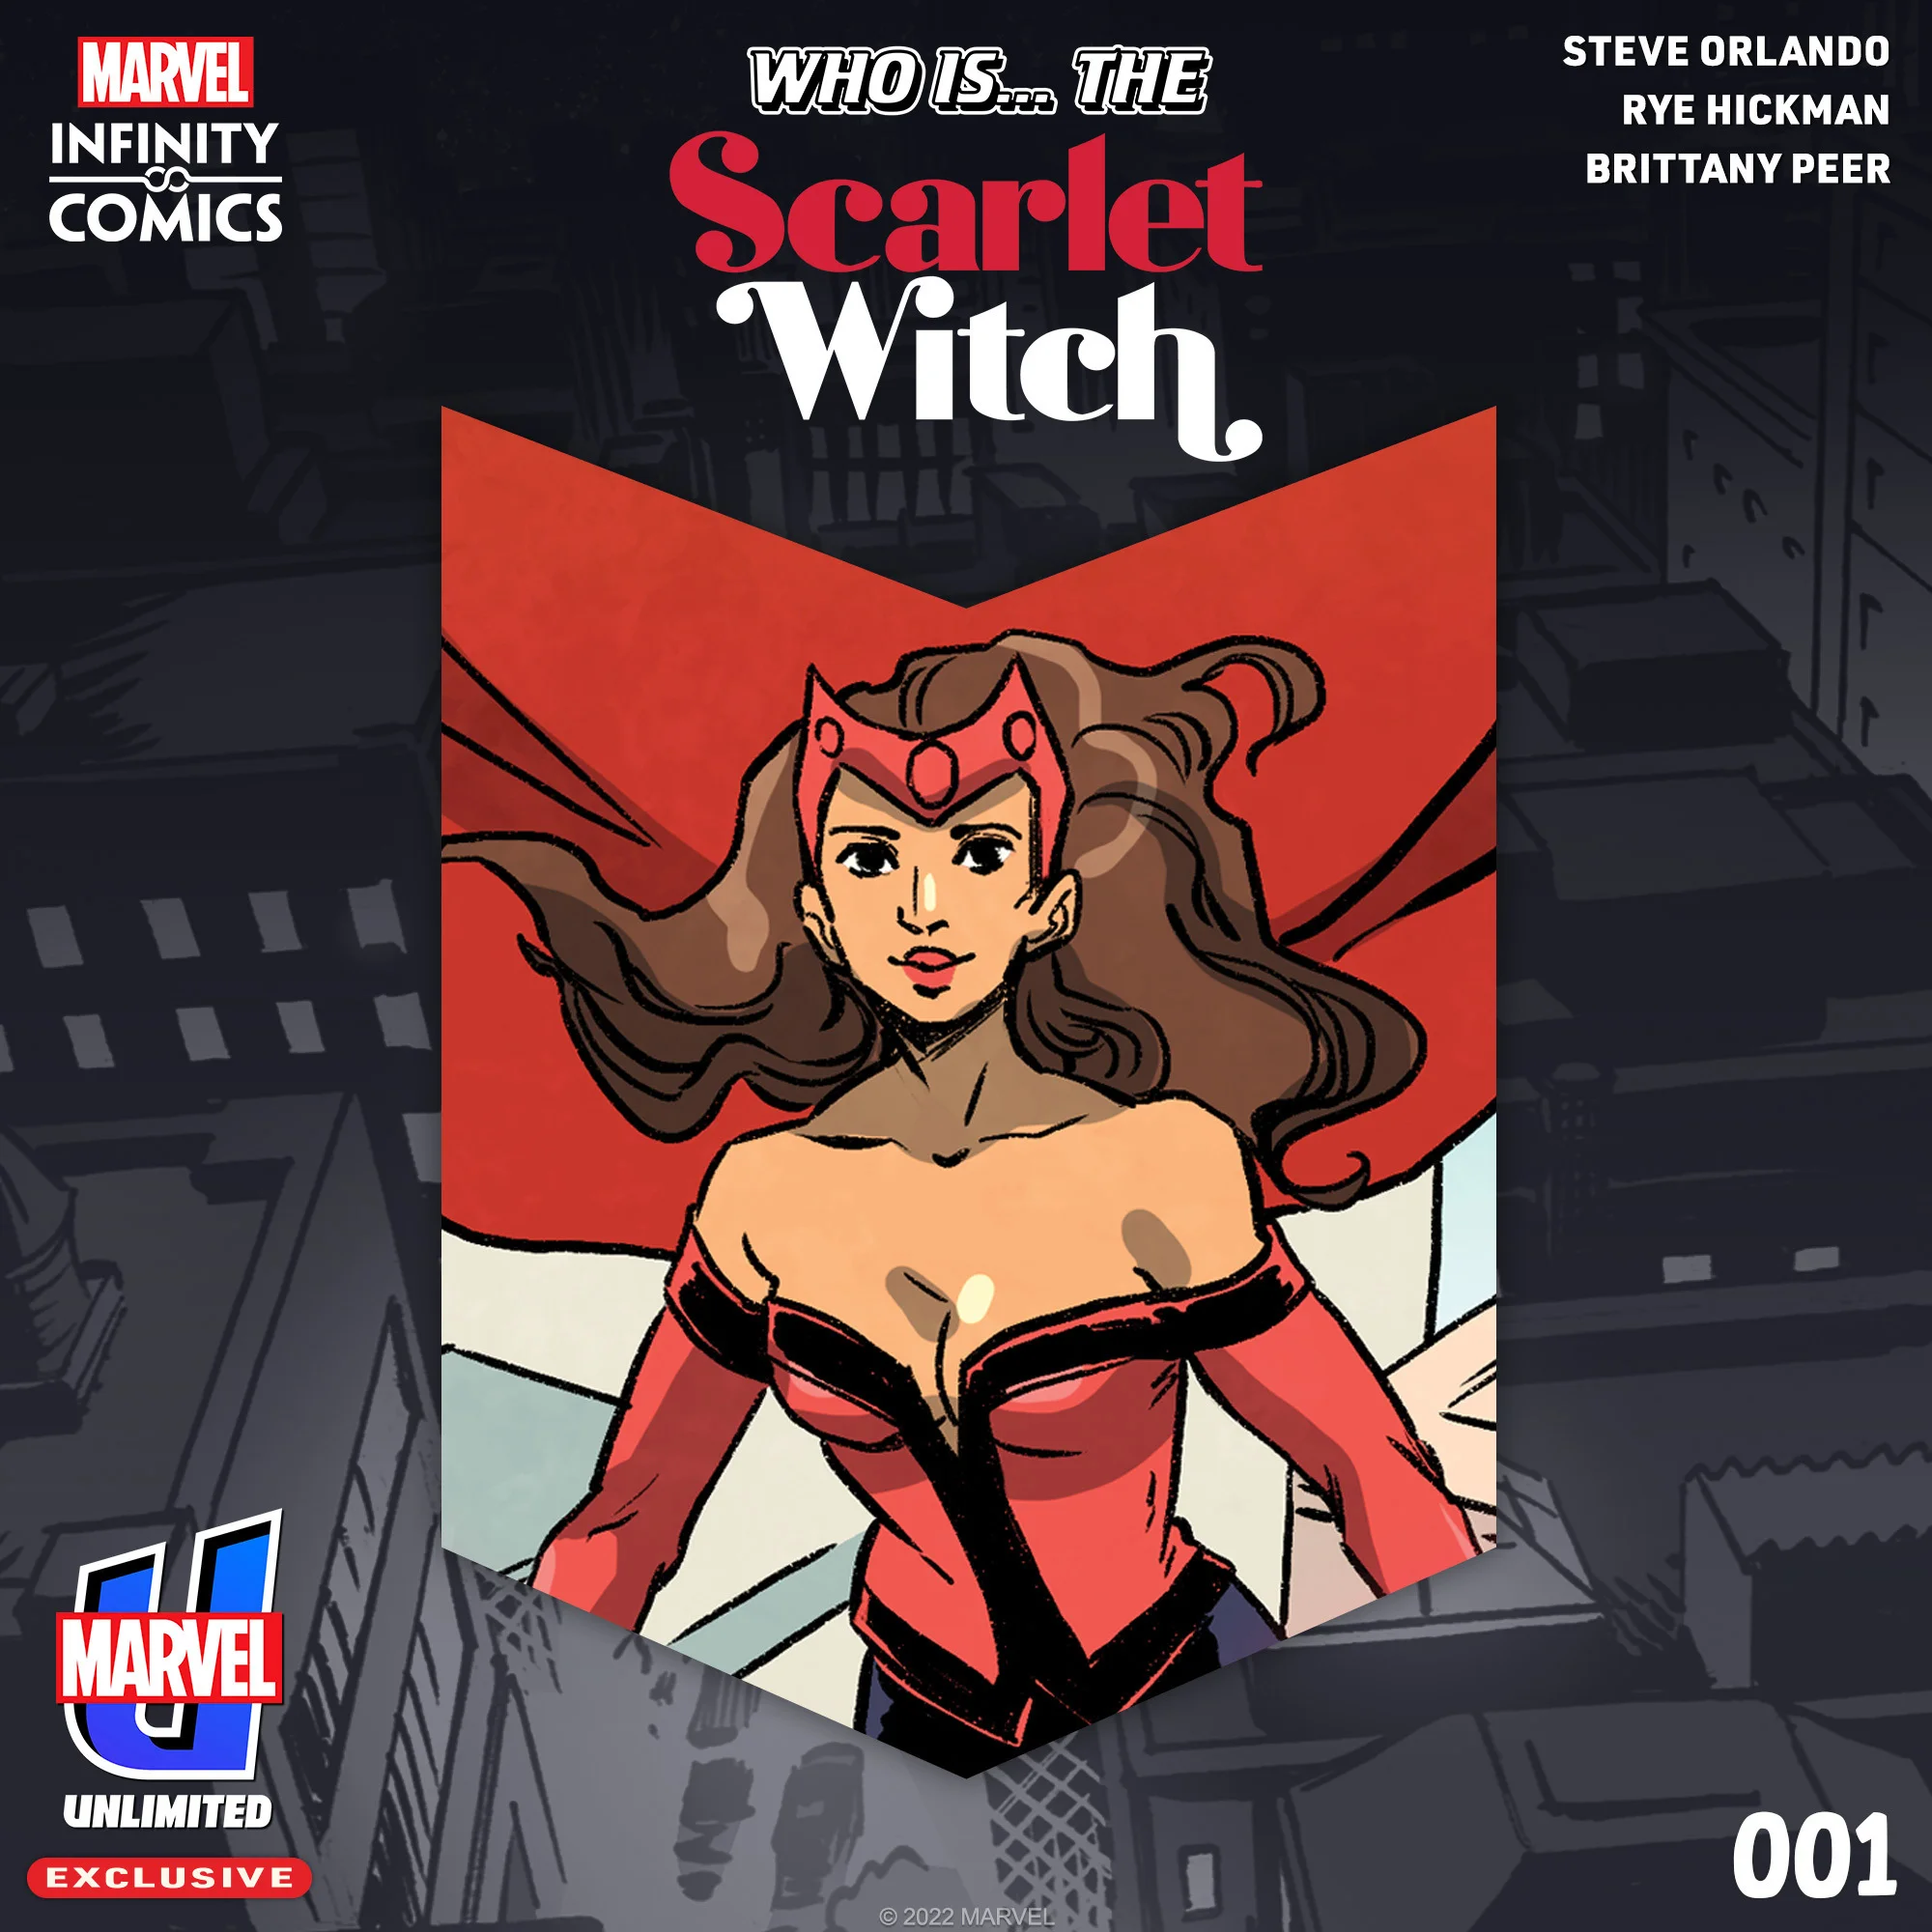 Infinity Comics Scarlet Witch via Marvel Comics for use by 360 Magazine